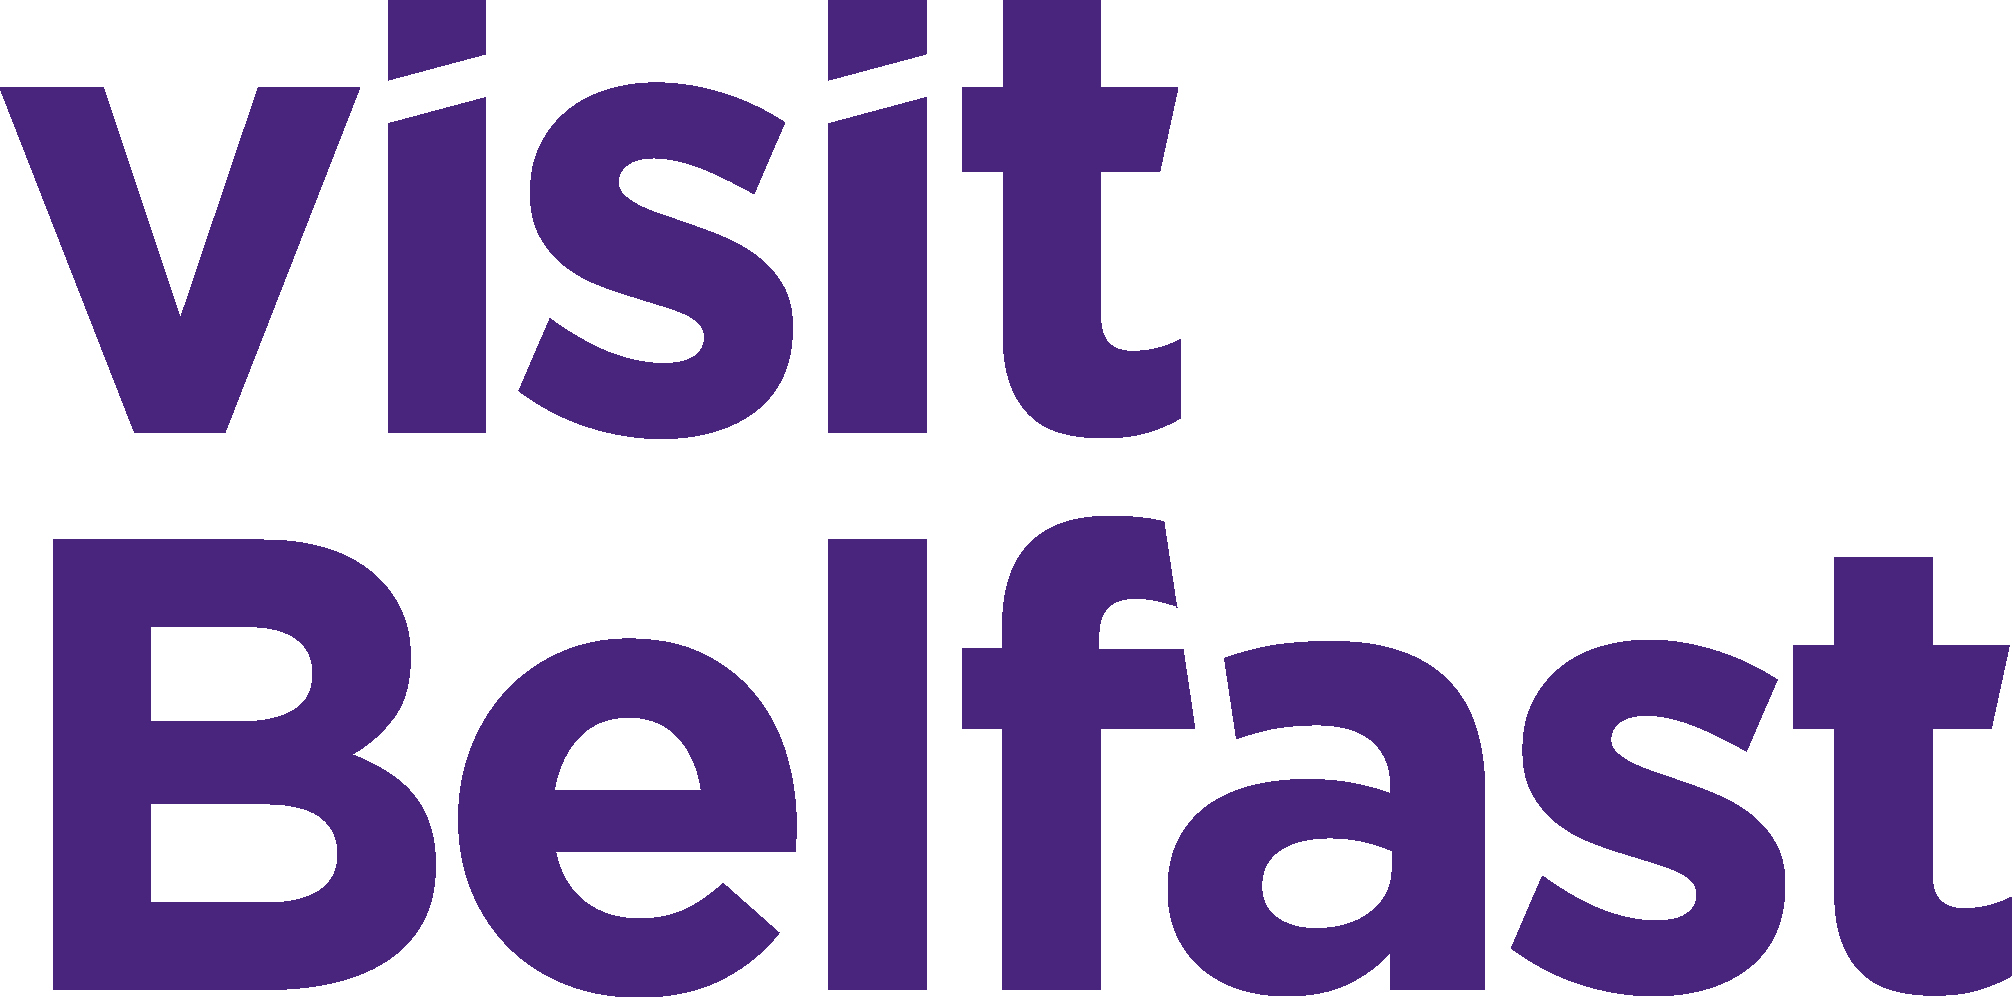 The logo for Visit Belfast. It is the words visit Belfast in purple font.